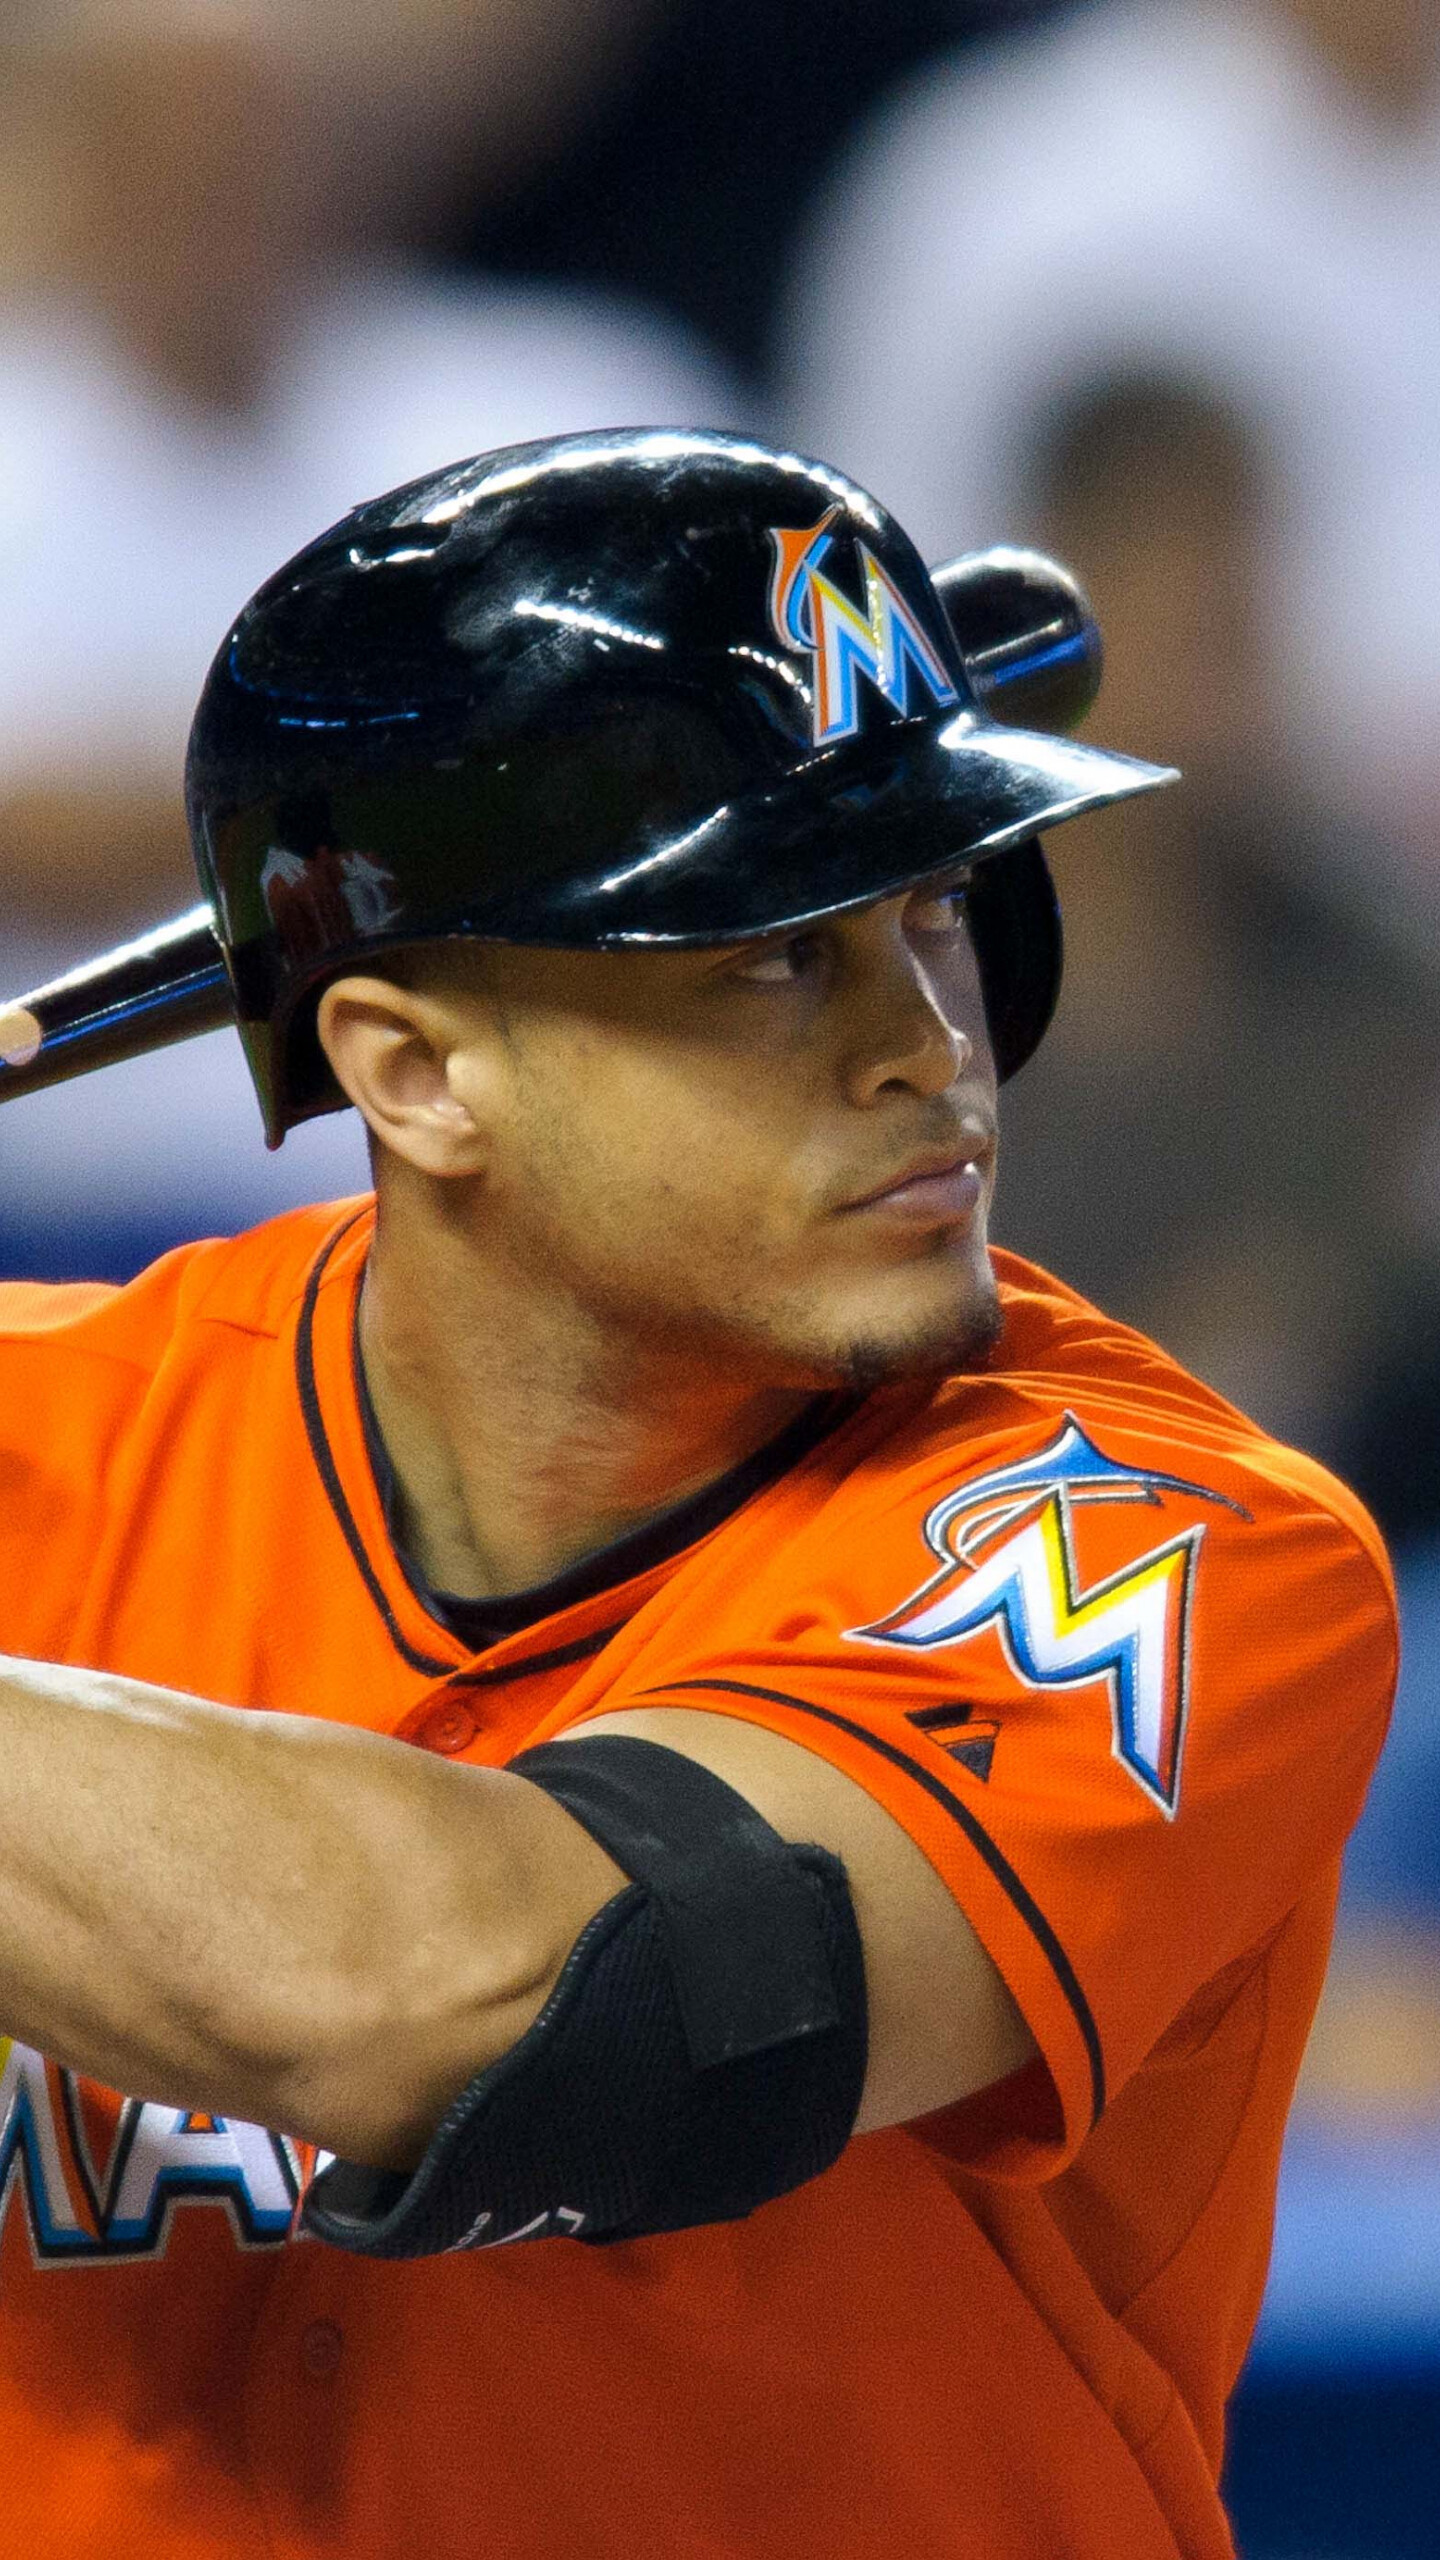 Giancarlo Stanton: The Miami Marlins, One of two MLB franchises to have never won a division title. 1440x2560 HD Wallpaper.